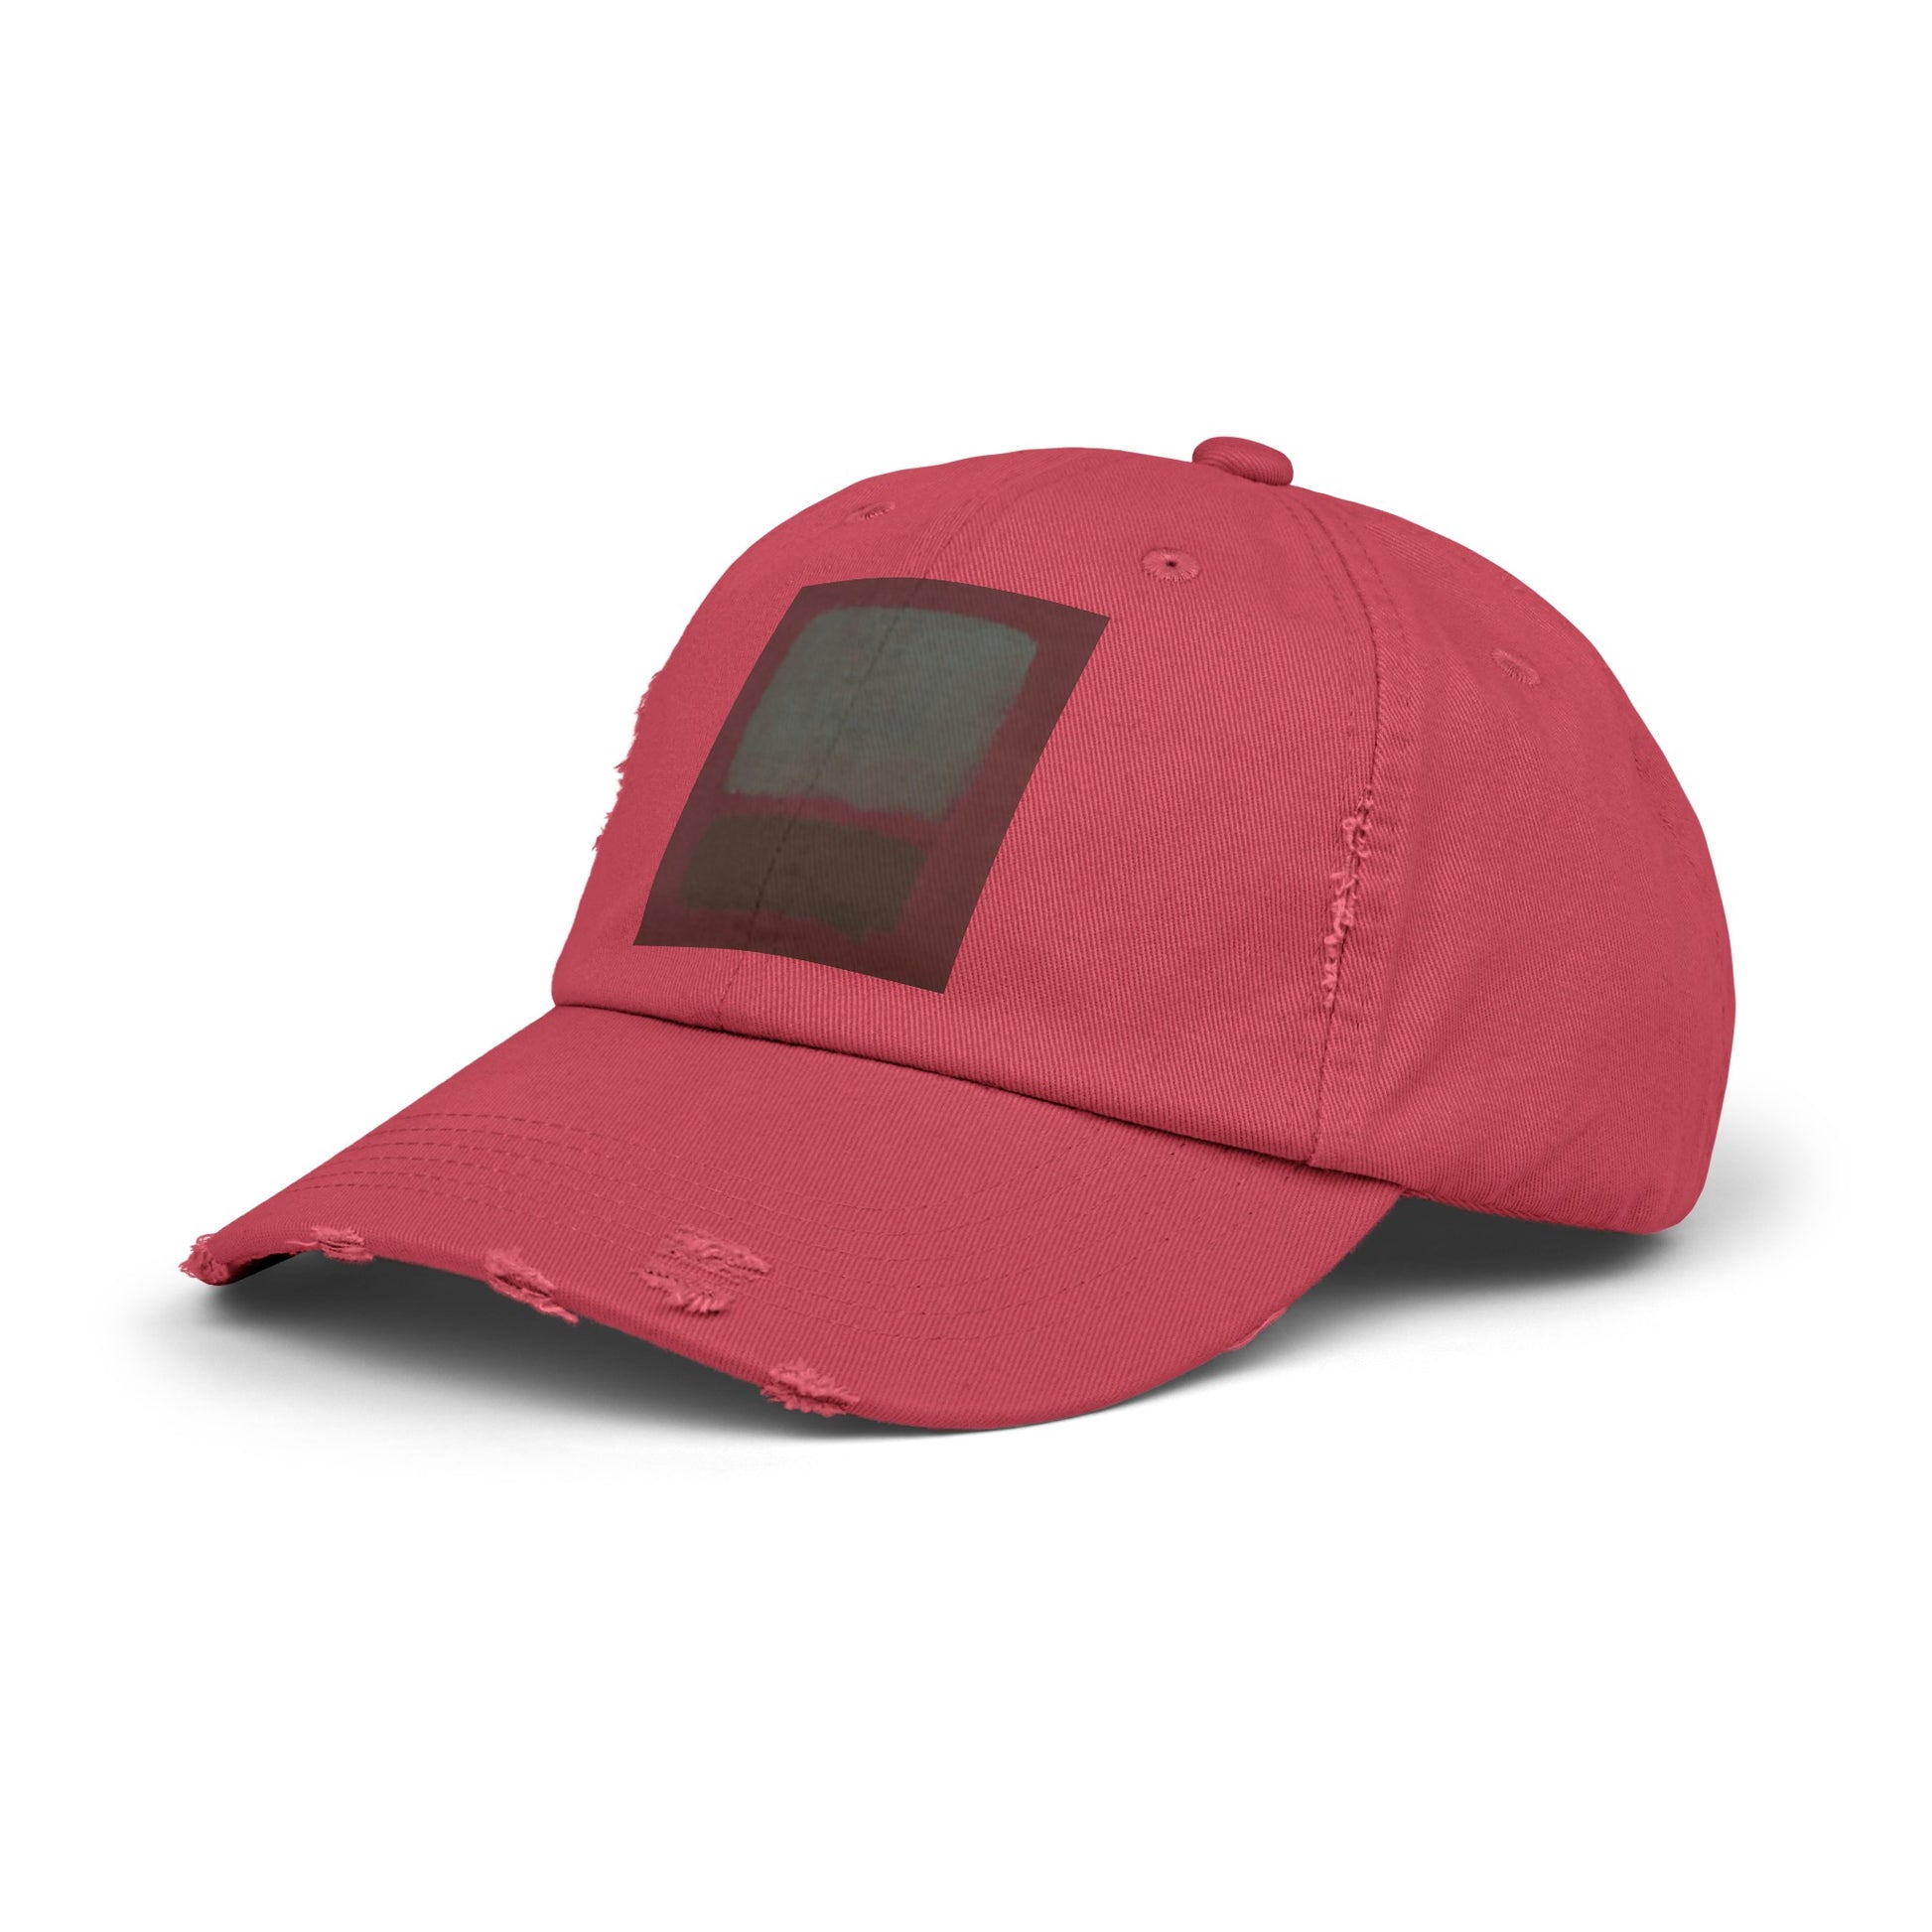 a red hat with a black patch on the front of it